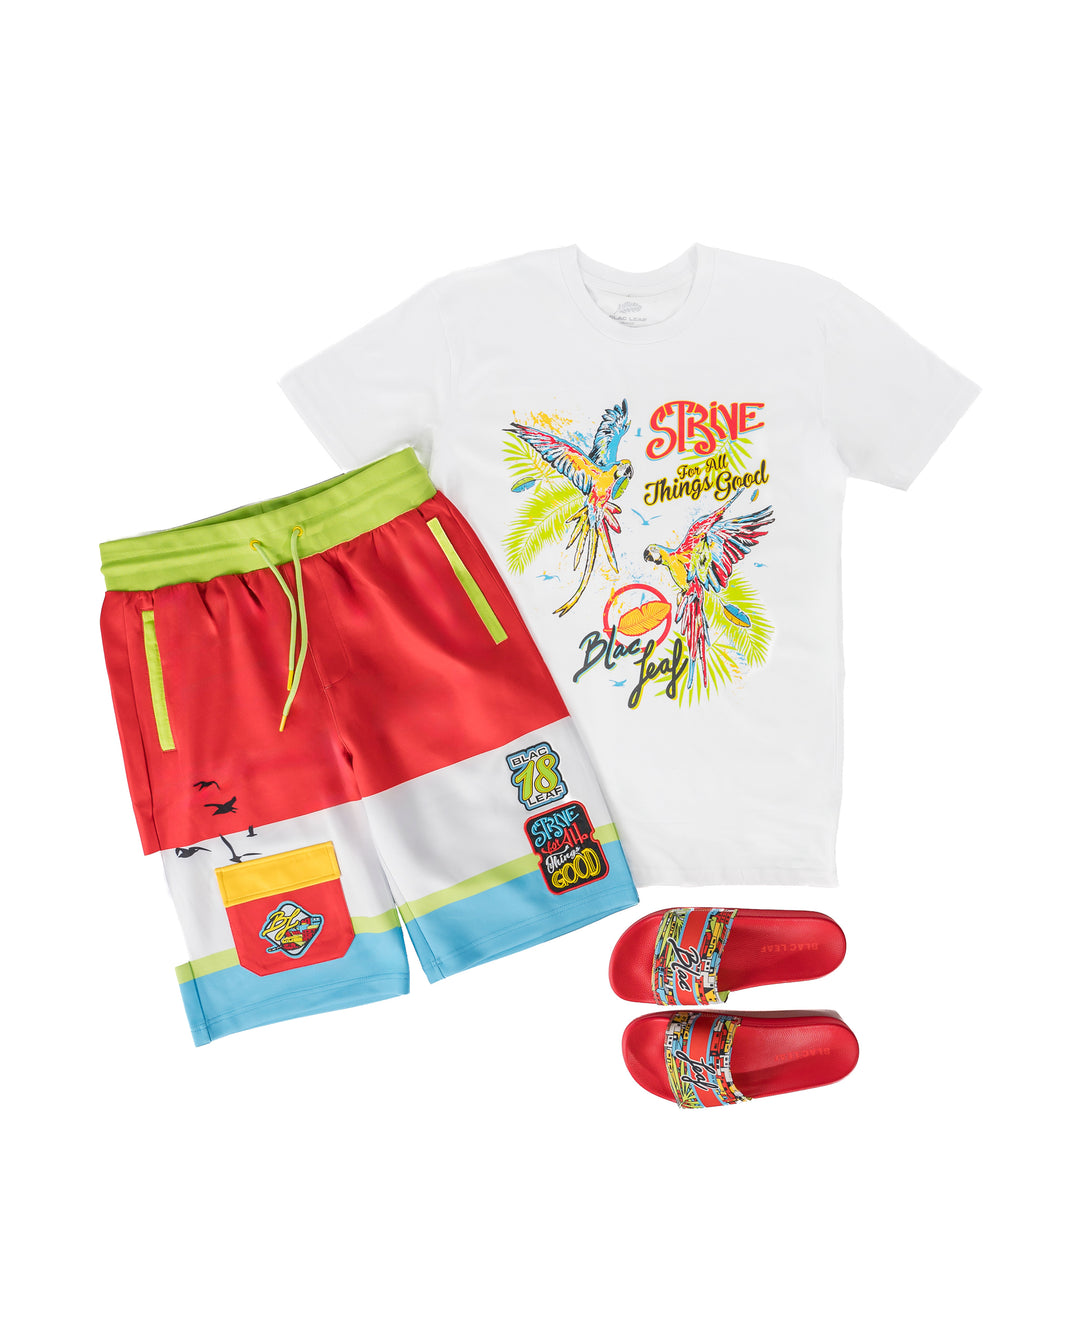 Strive For All Things Good Shirt, Short, and Slide Combo 2